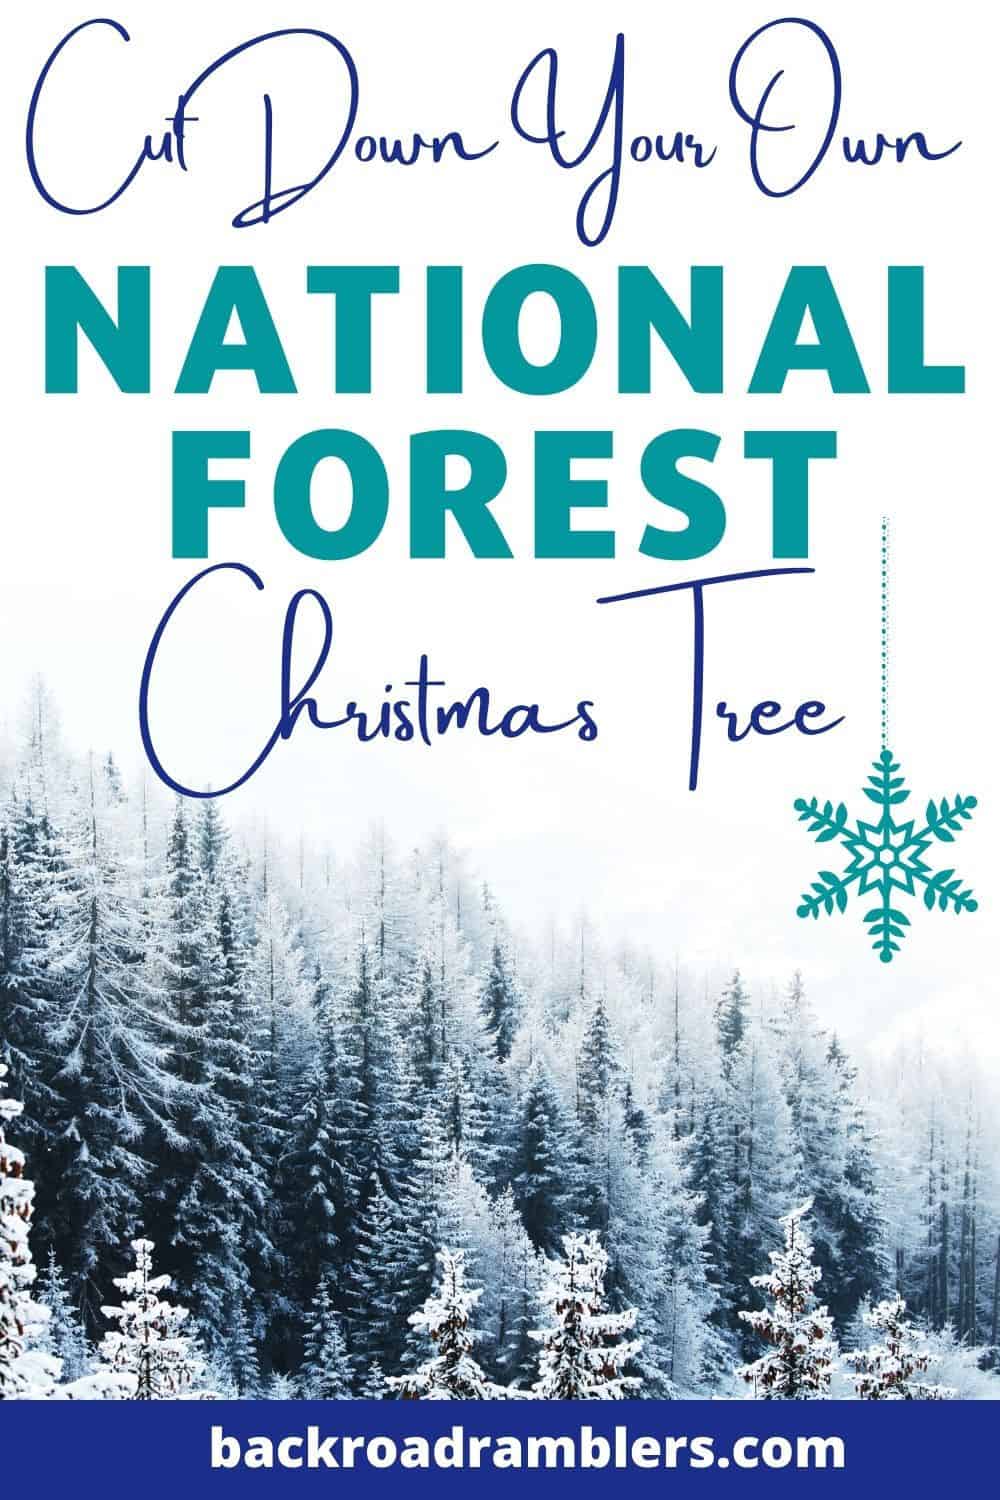 A winter scene showing a spruce forest covered with snow. Text overlay: Cut Down Your Own National Forest Christmas Tree.